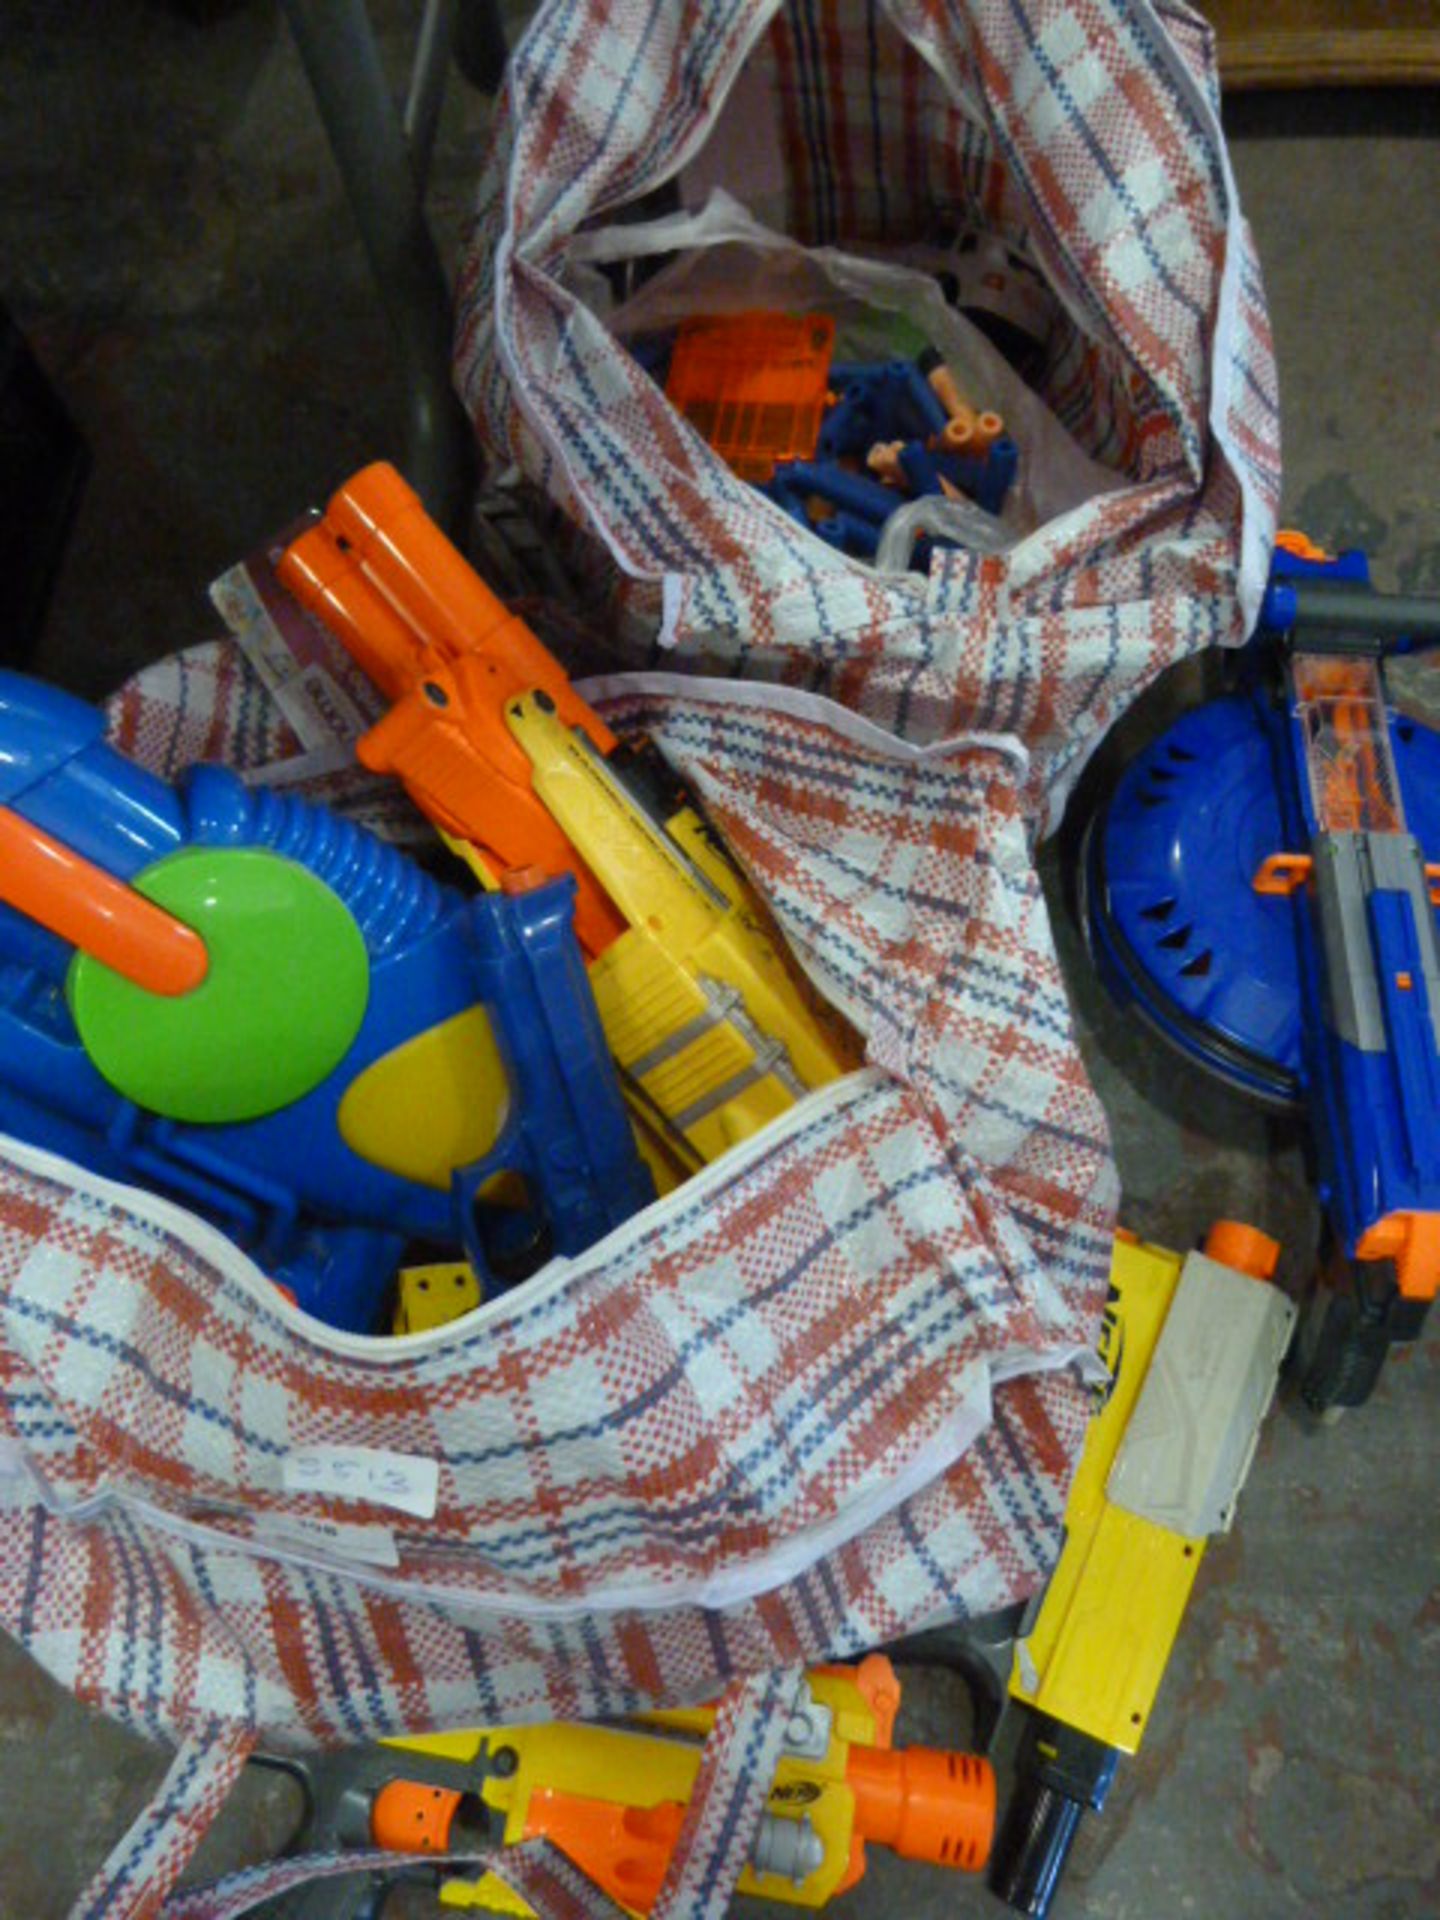 Two of Nerf Guns and Assorted Toys